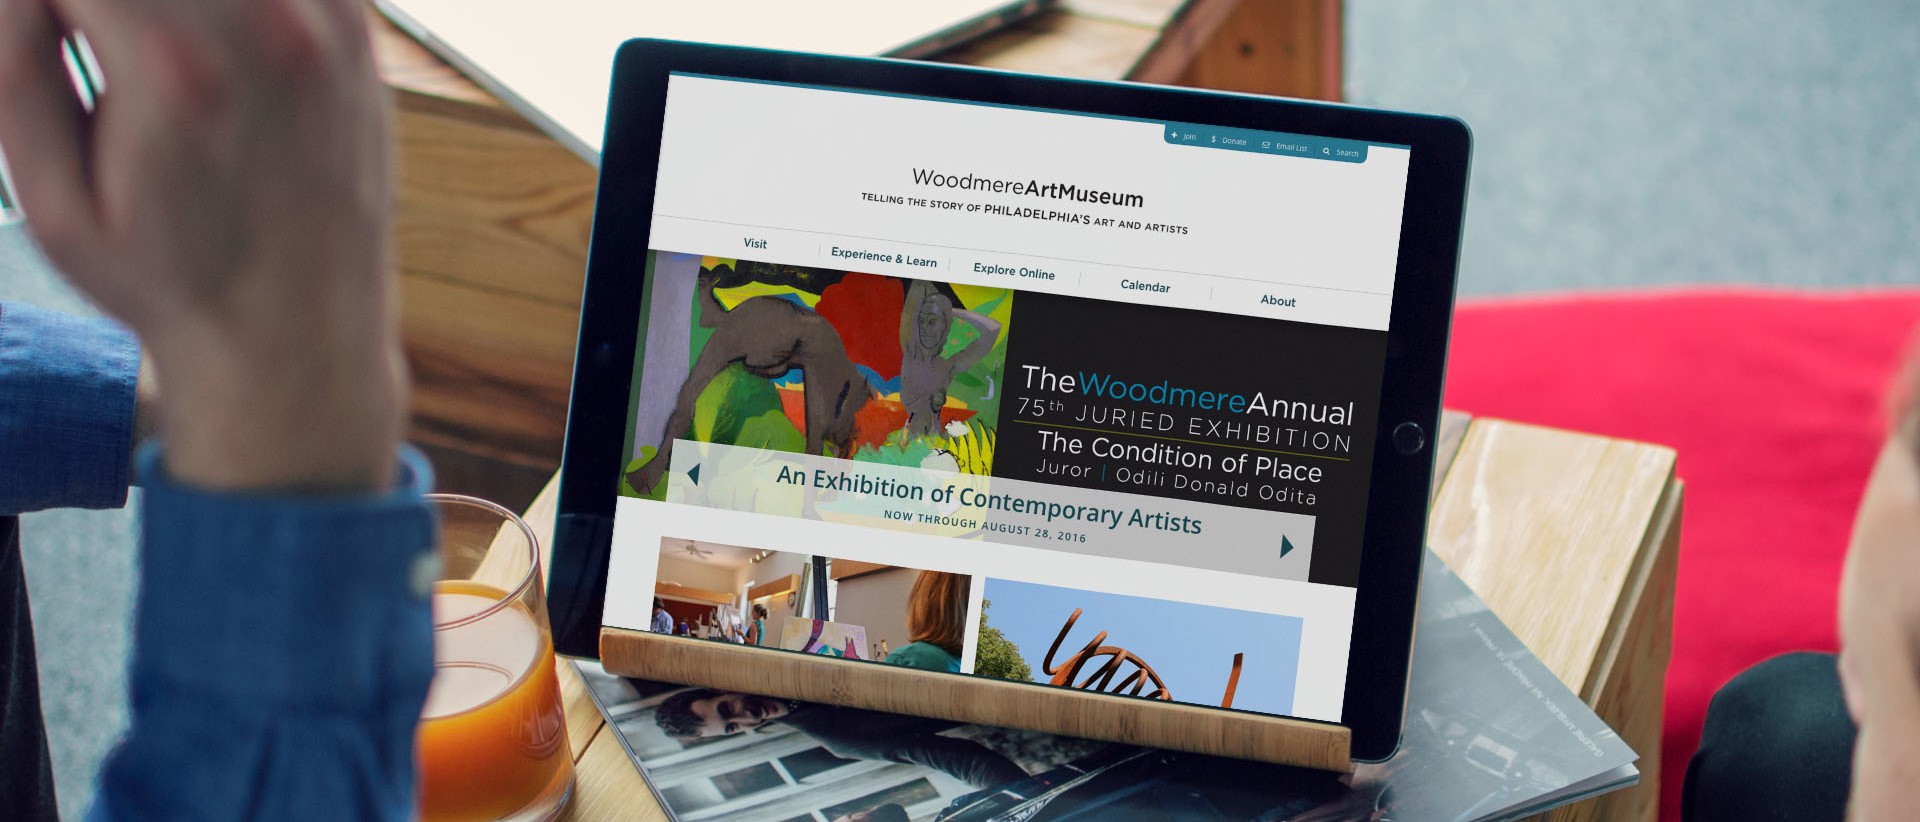 Woodmere Art Museum Website Home Page on Laptop